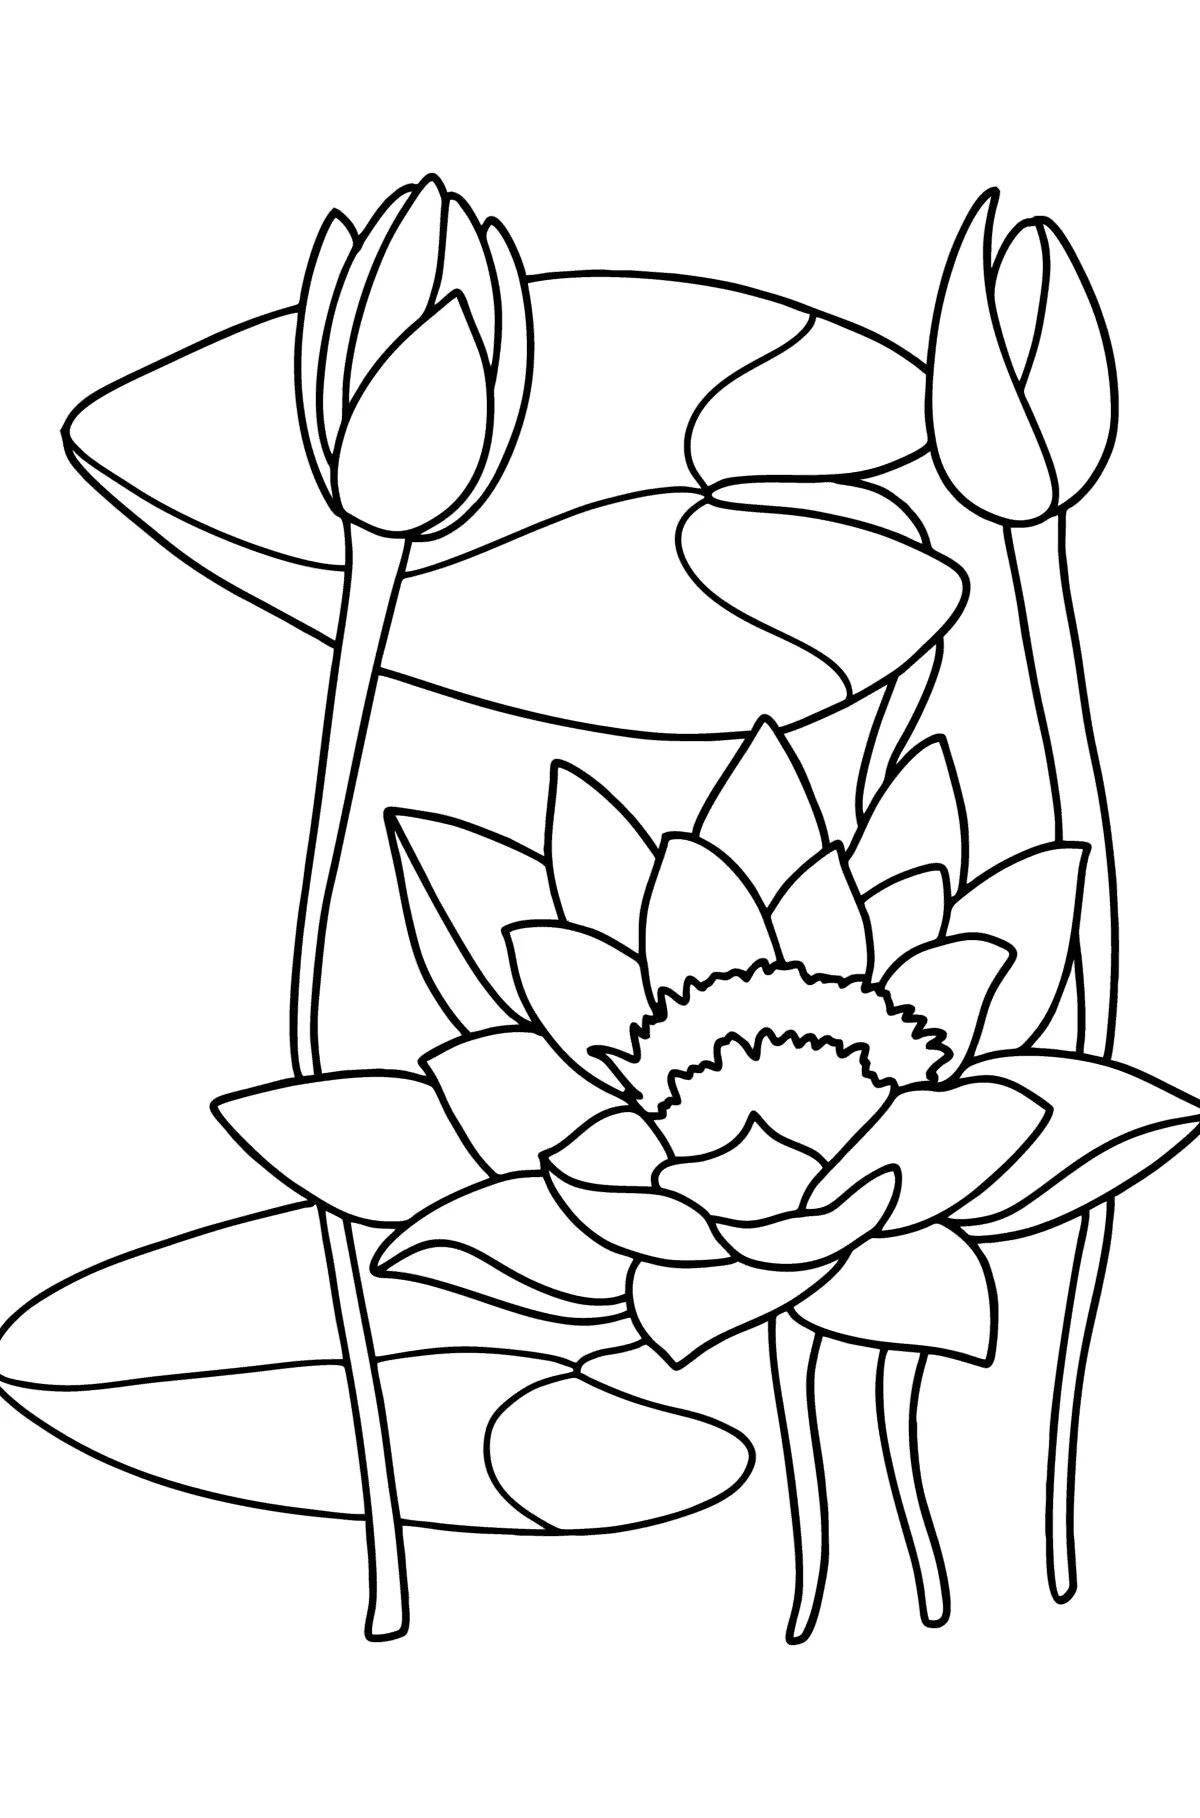 Water lily #3